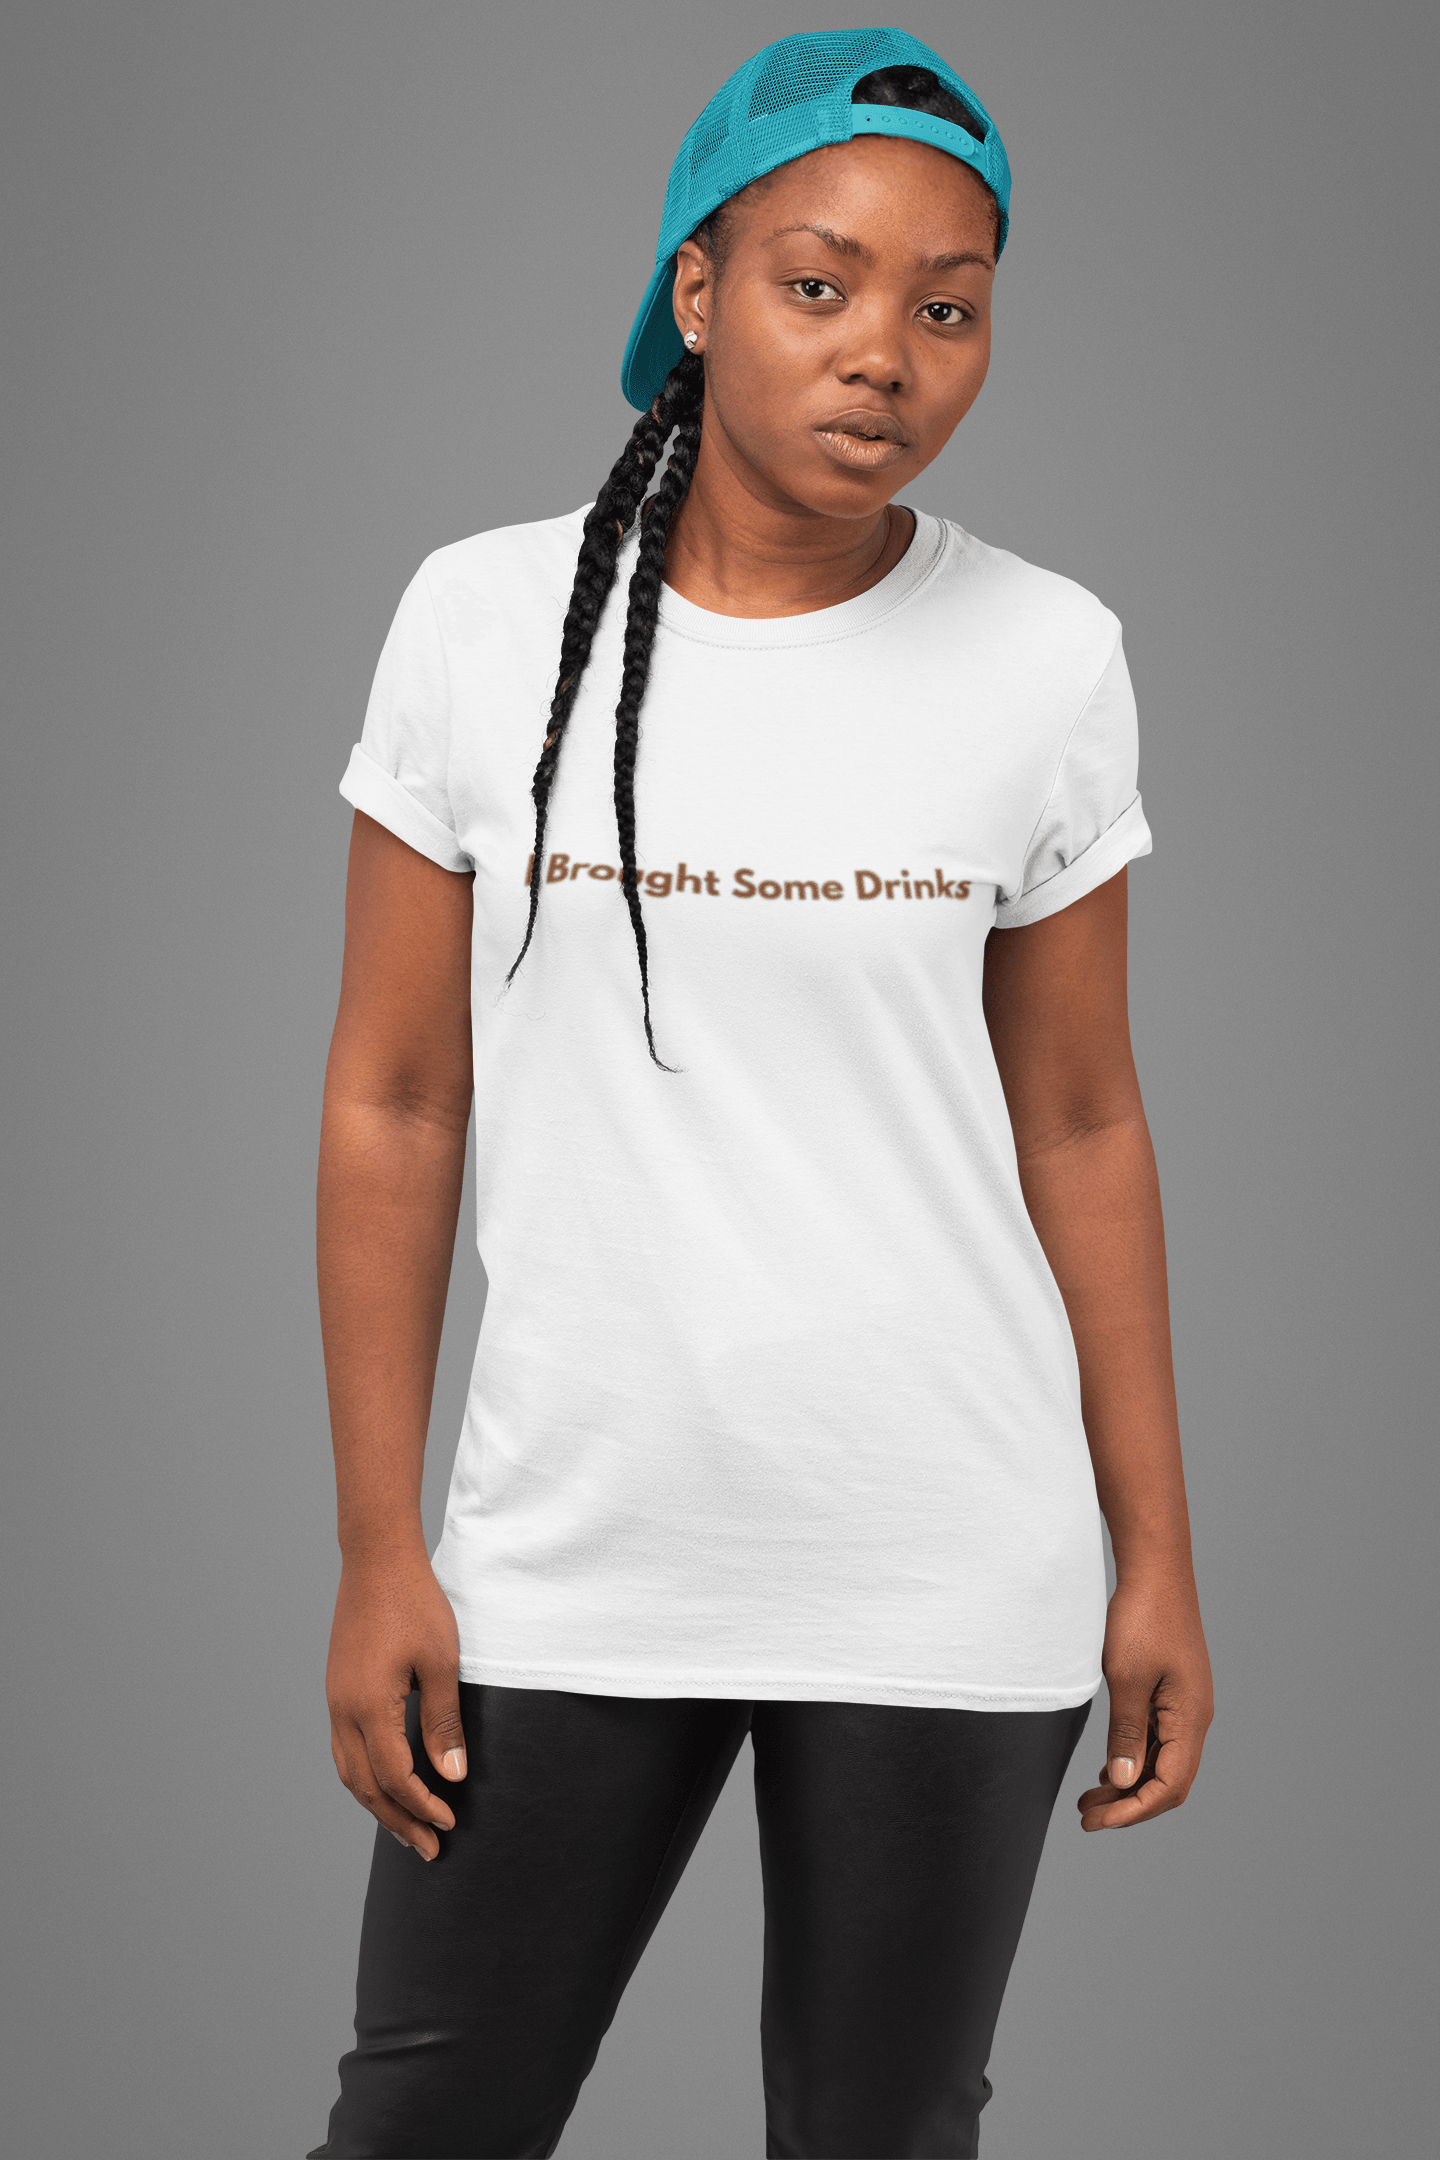 I Brought Some Drinks Tee - Sharp Tact Kreativ | Tees & Gifts with Encouraging Messages to Brighten Your Day with a Bit of Wit